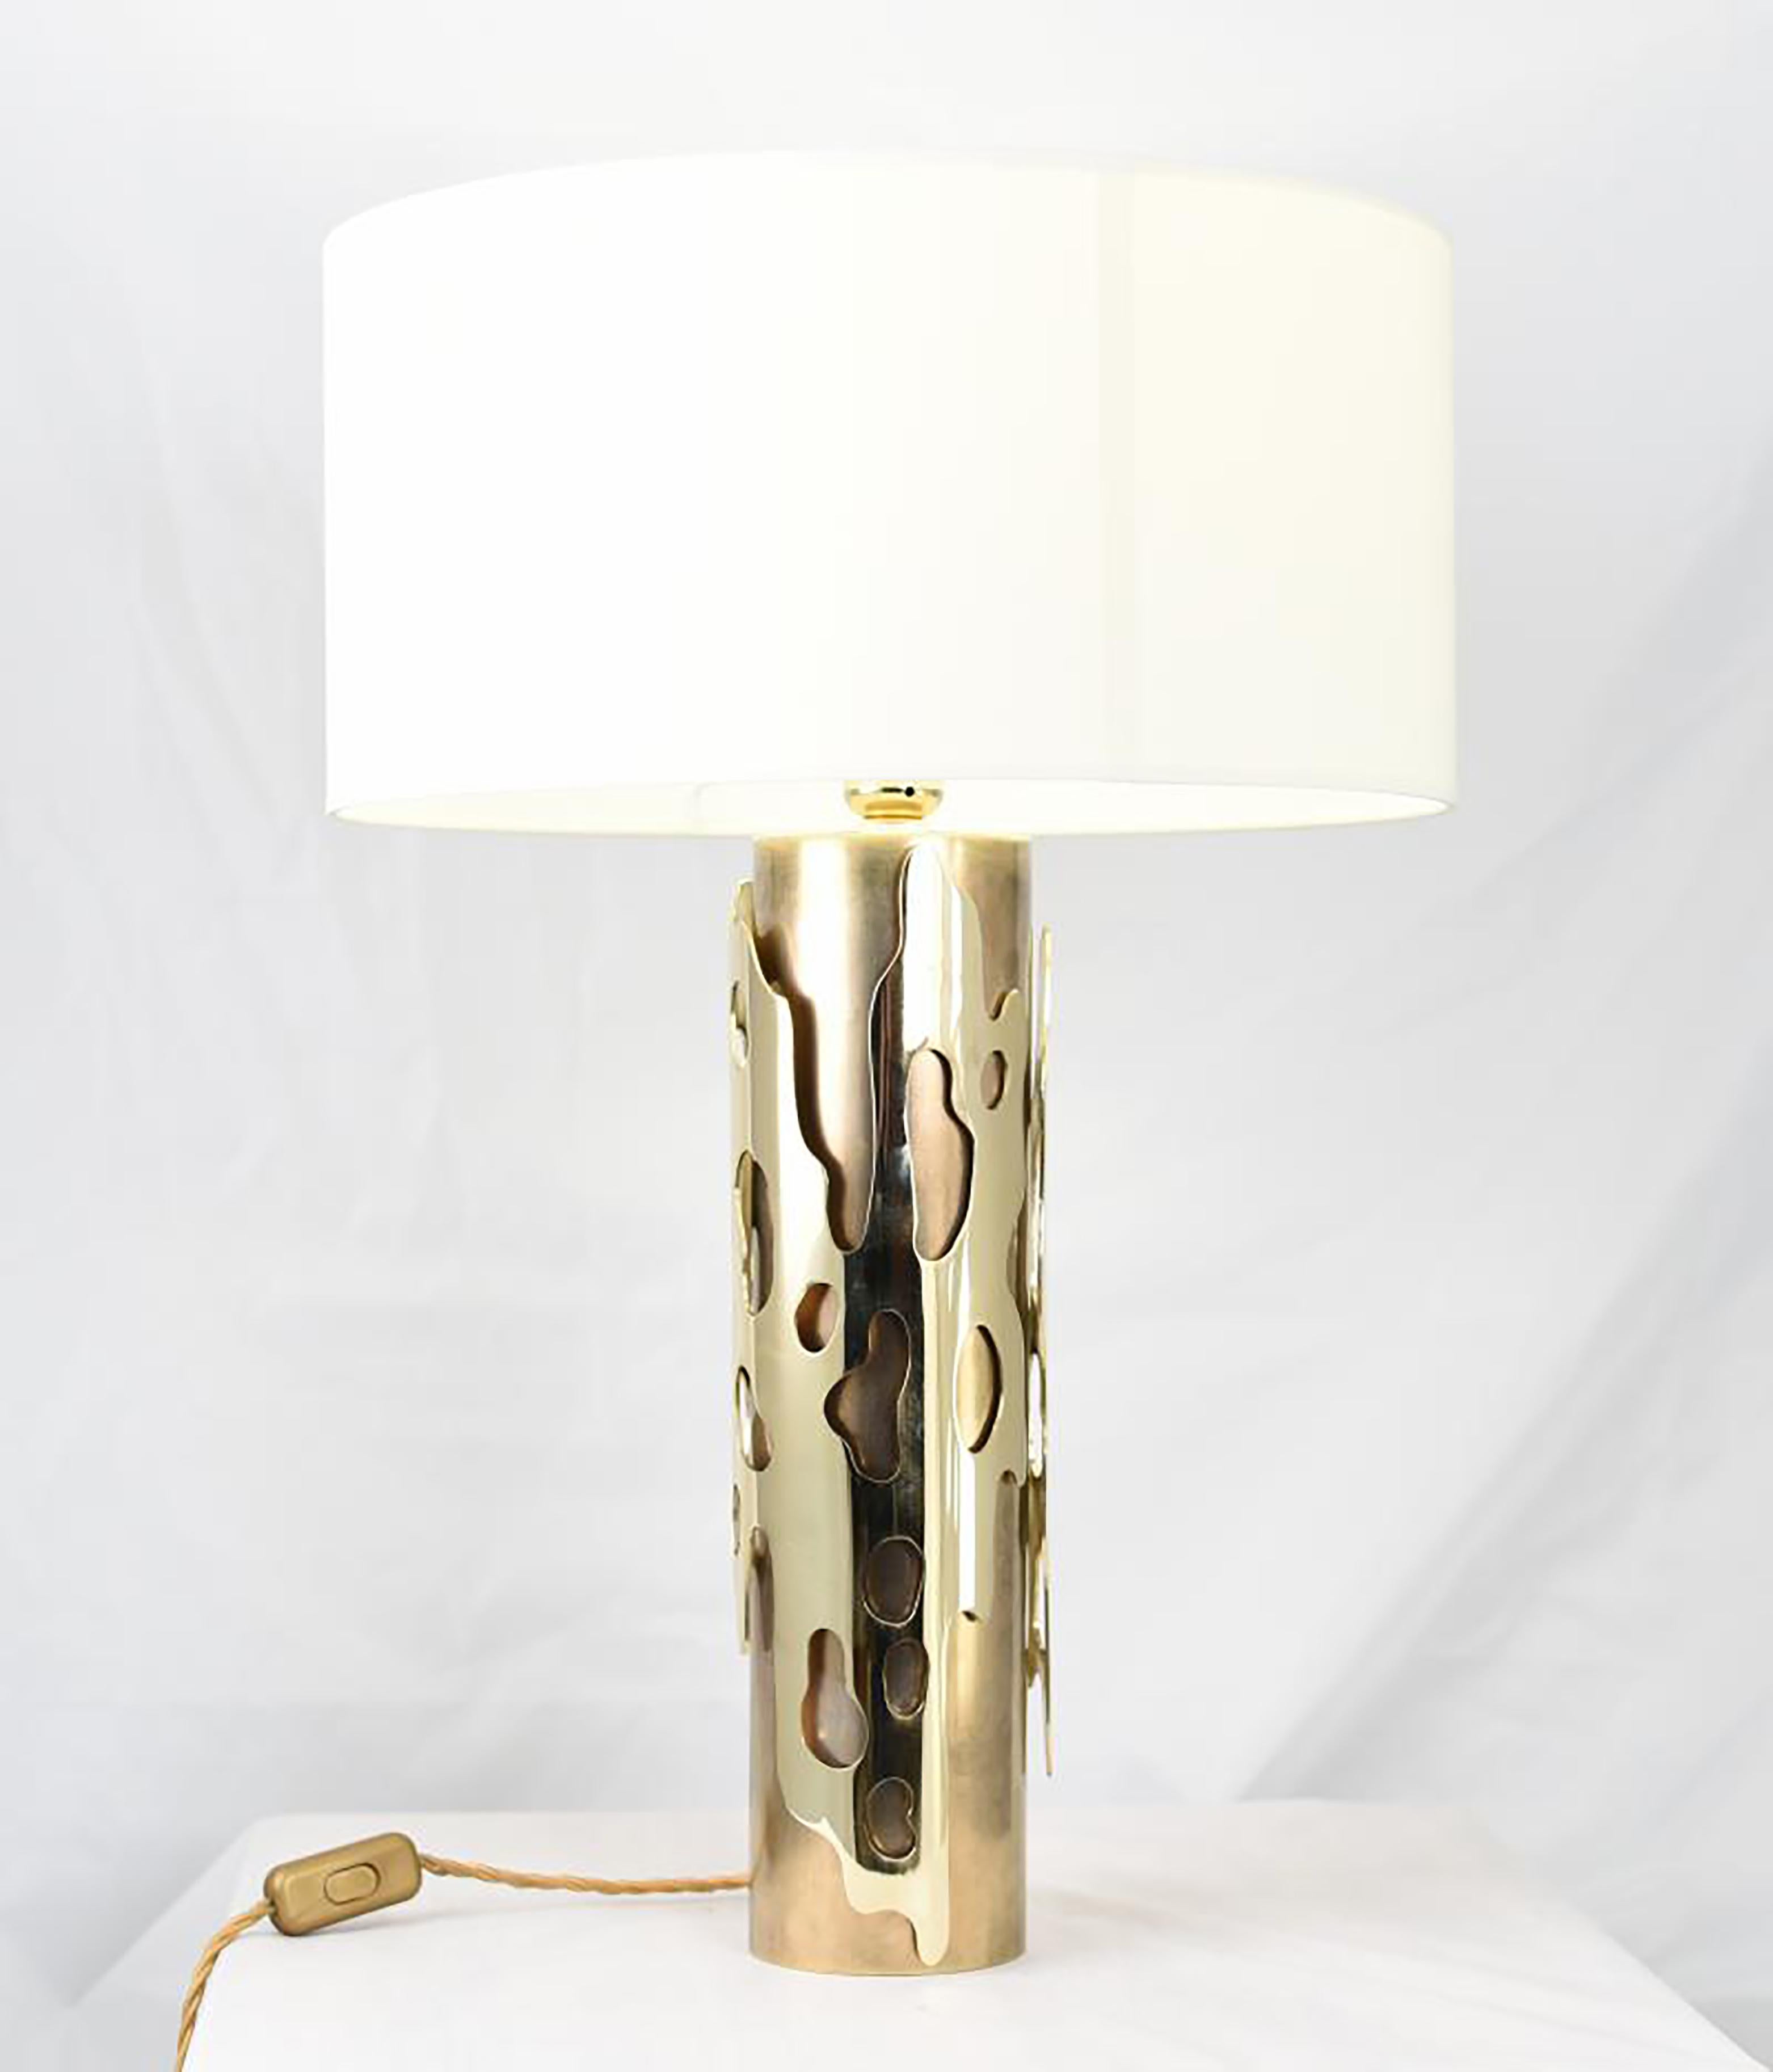 Brushed brass base and mirror polished brass ornement.

Jean Arriau is sensitive to everything around him and likes to describe it through sculptures more grandiose than each other.

The signature Jean Arriau truly is one of France's finest